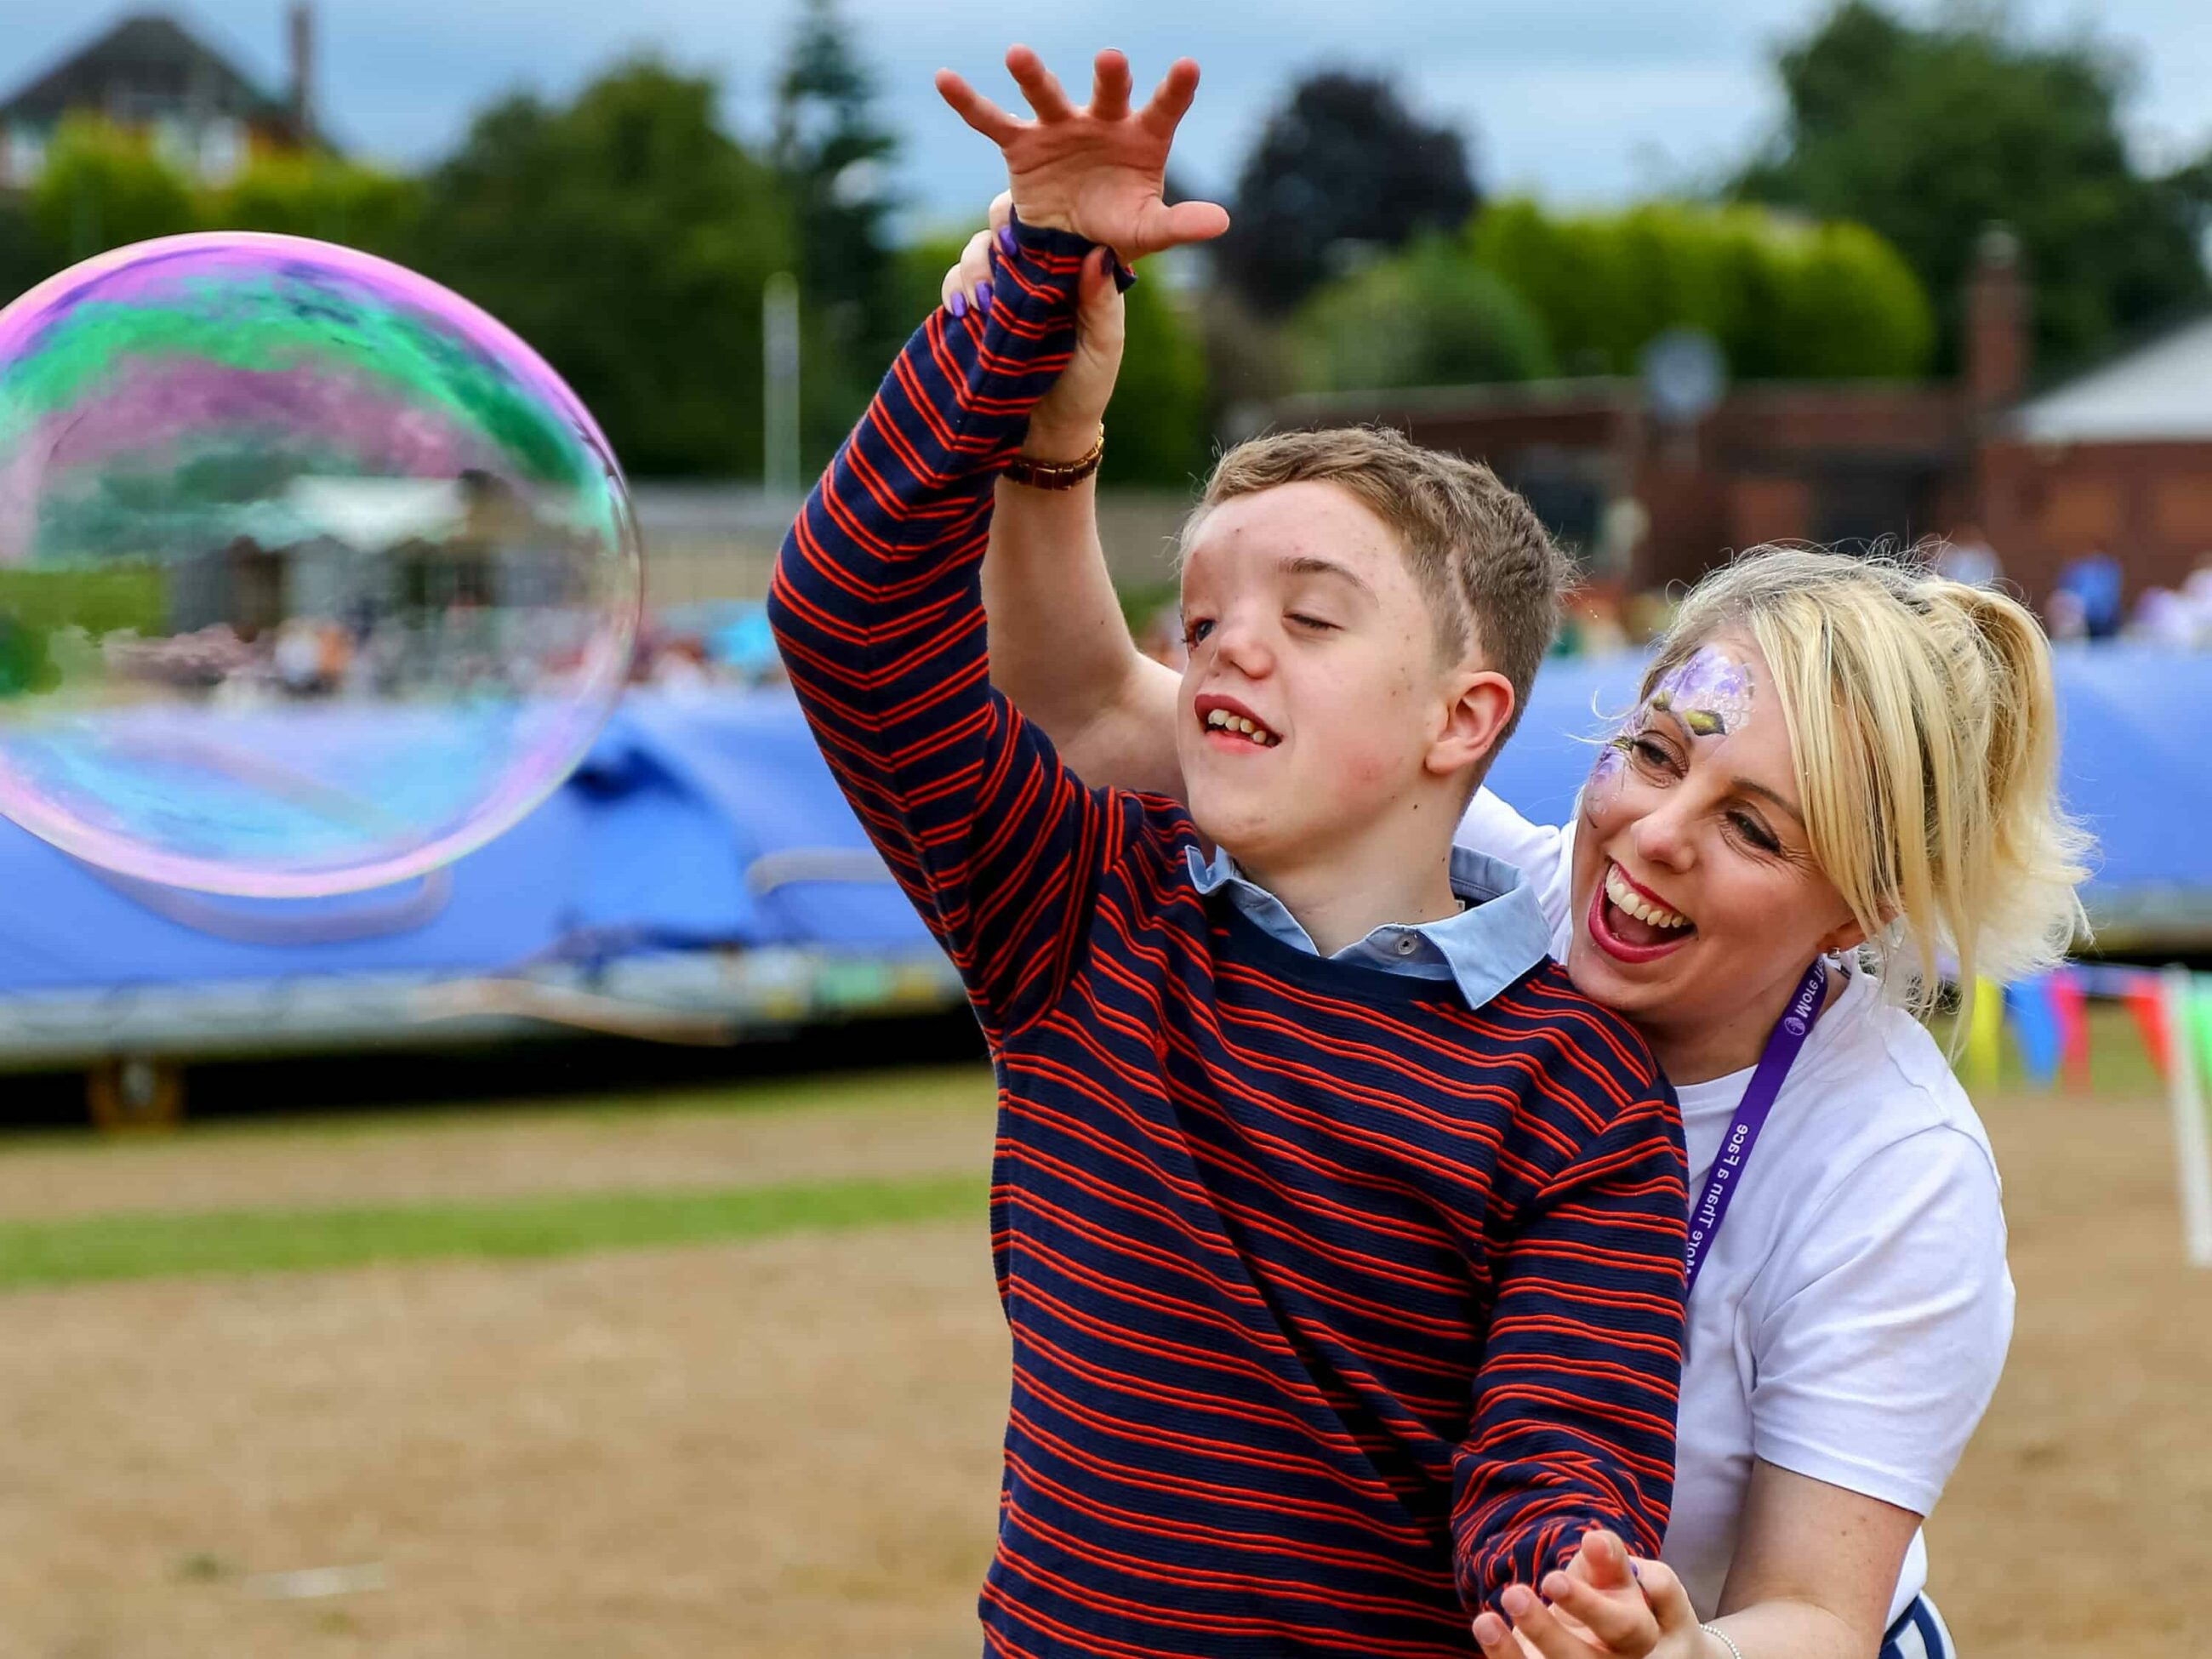 Young child and instructor play with a massive soap bubble in a park.